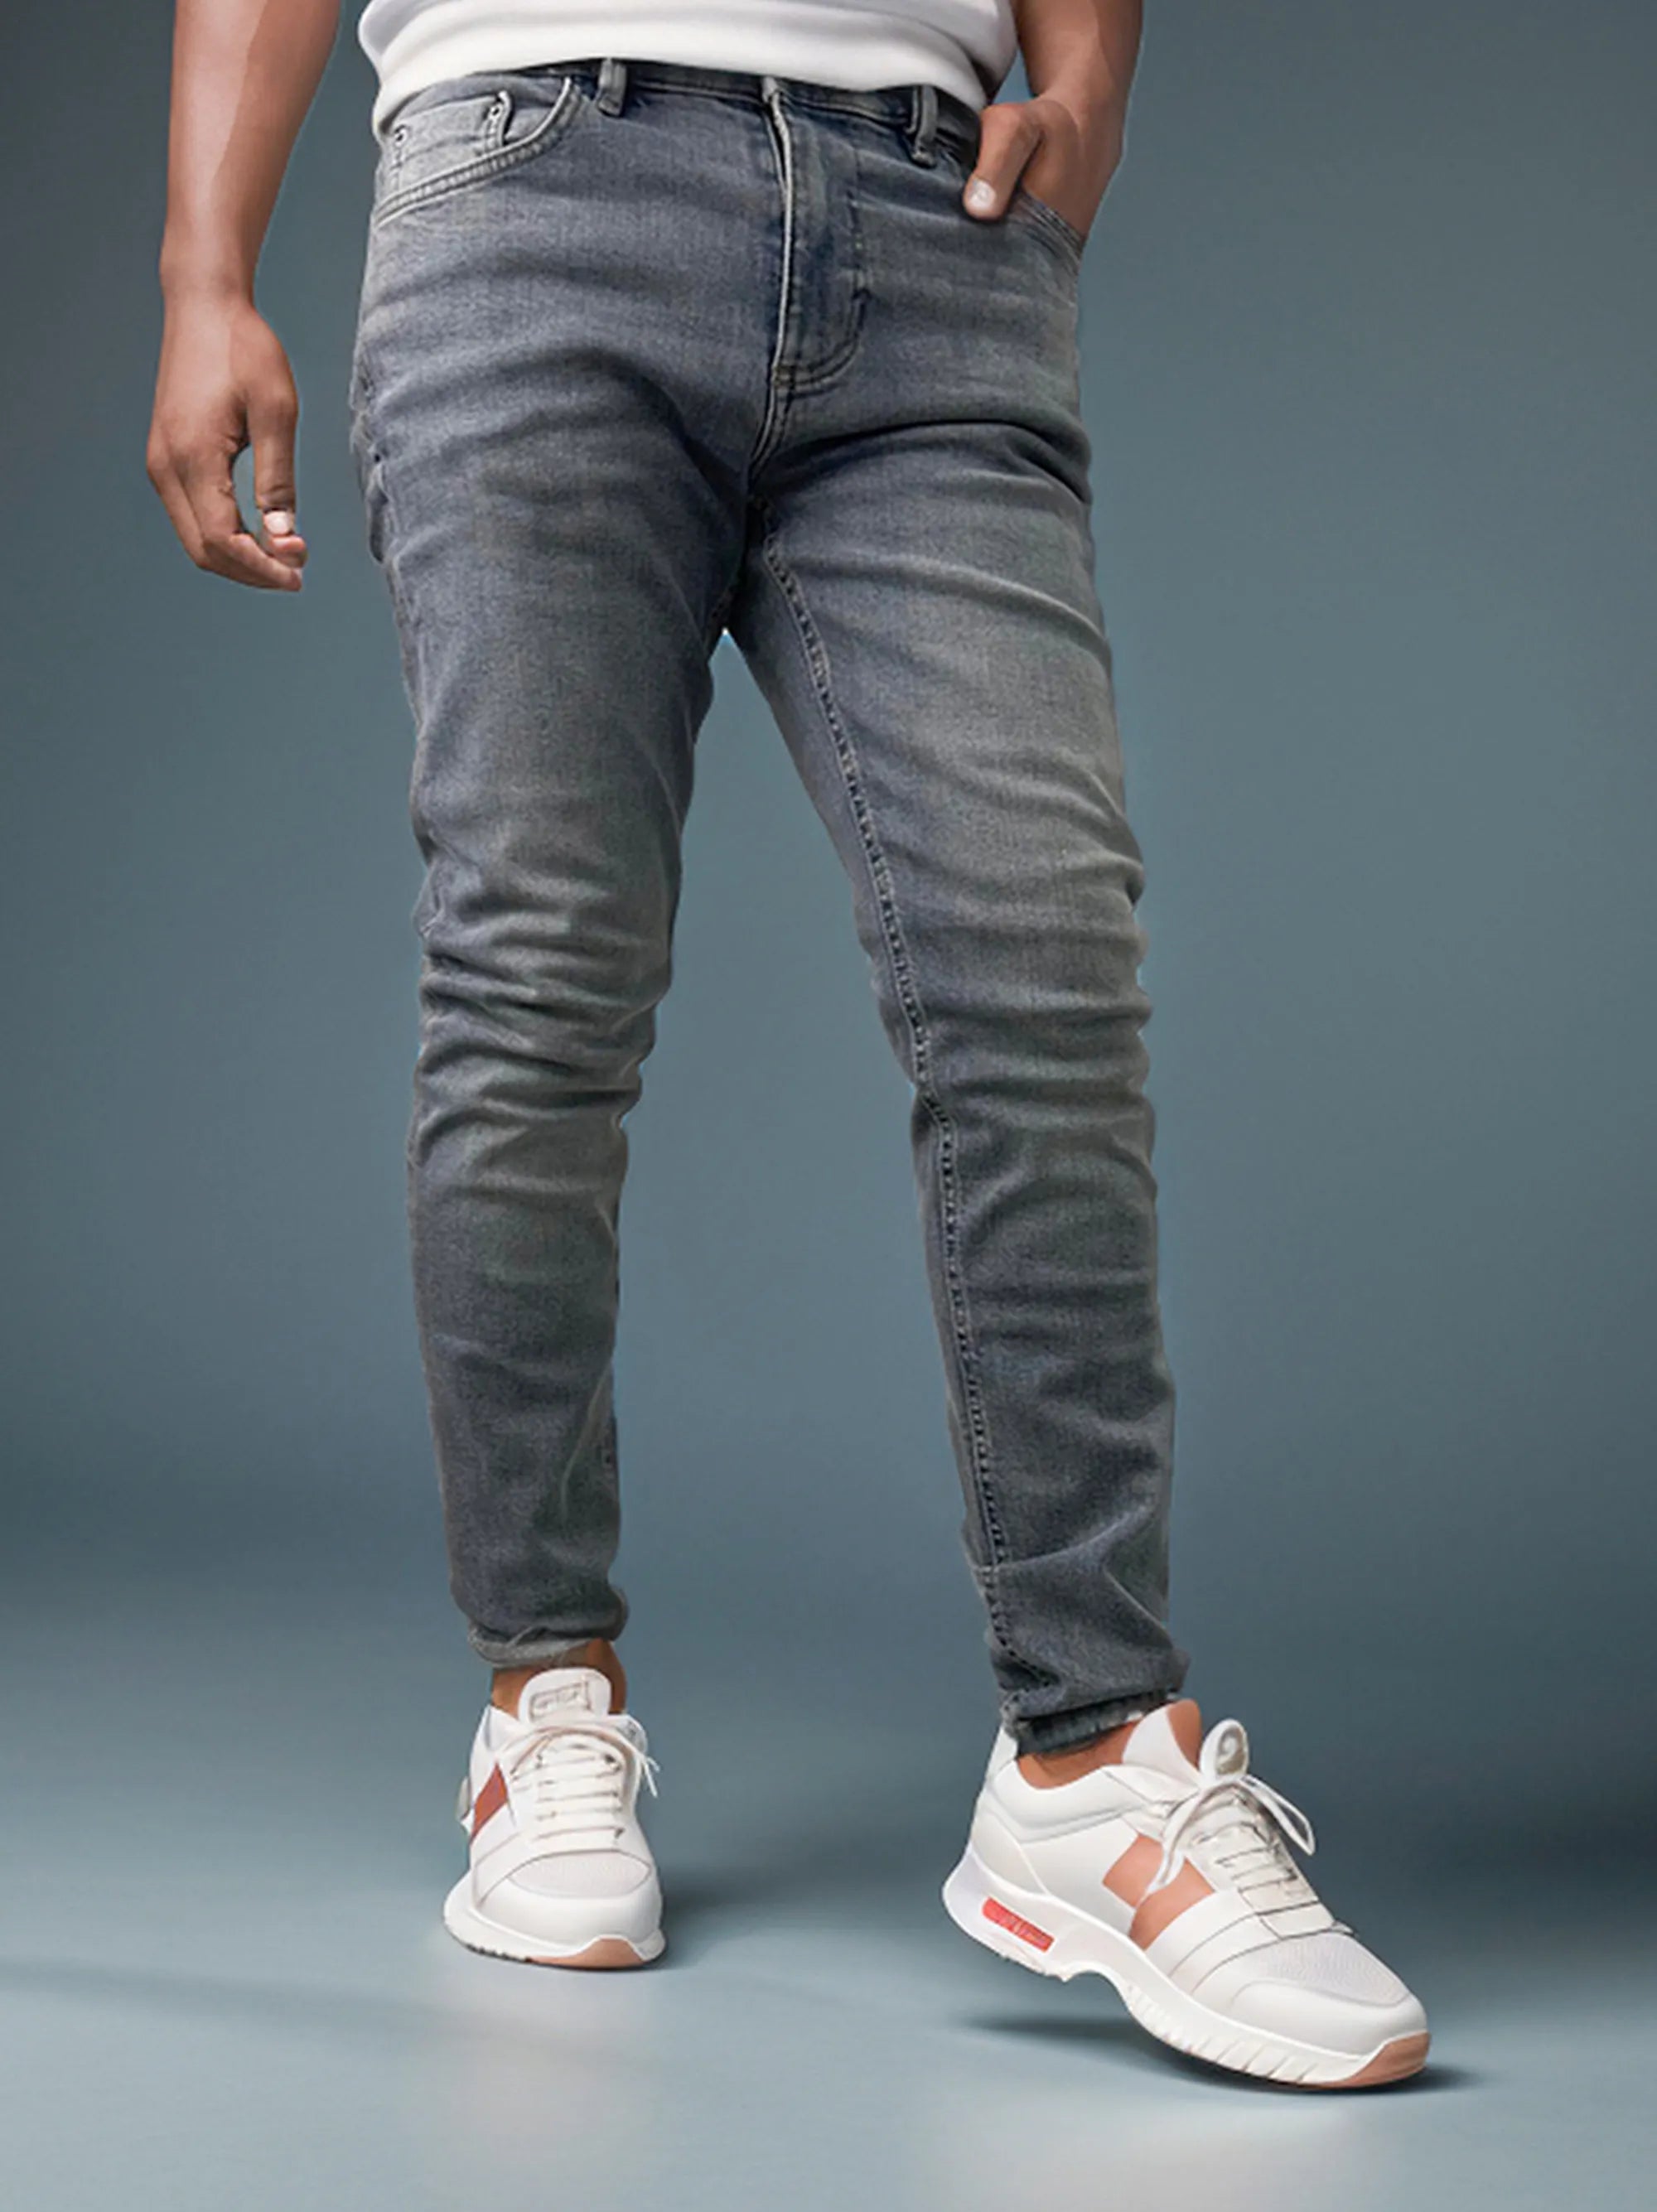 Men’s Stretchable Faded Gray Skinny Fit Jeans Pant